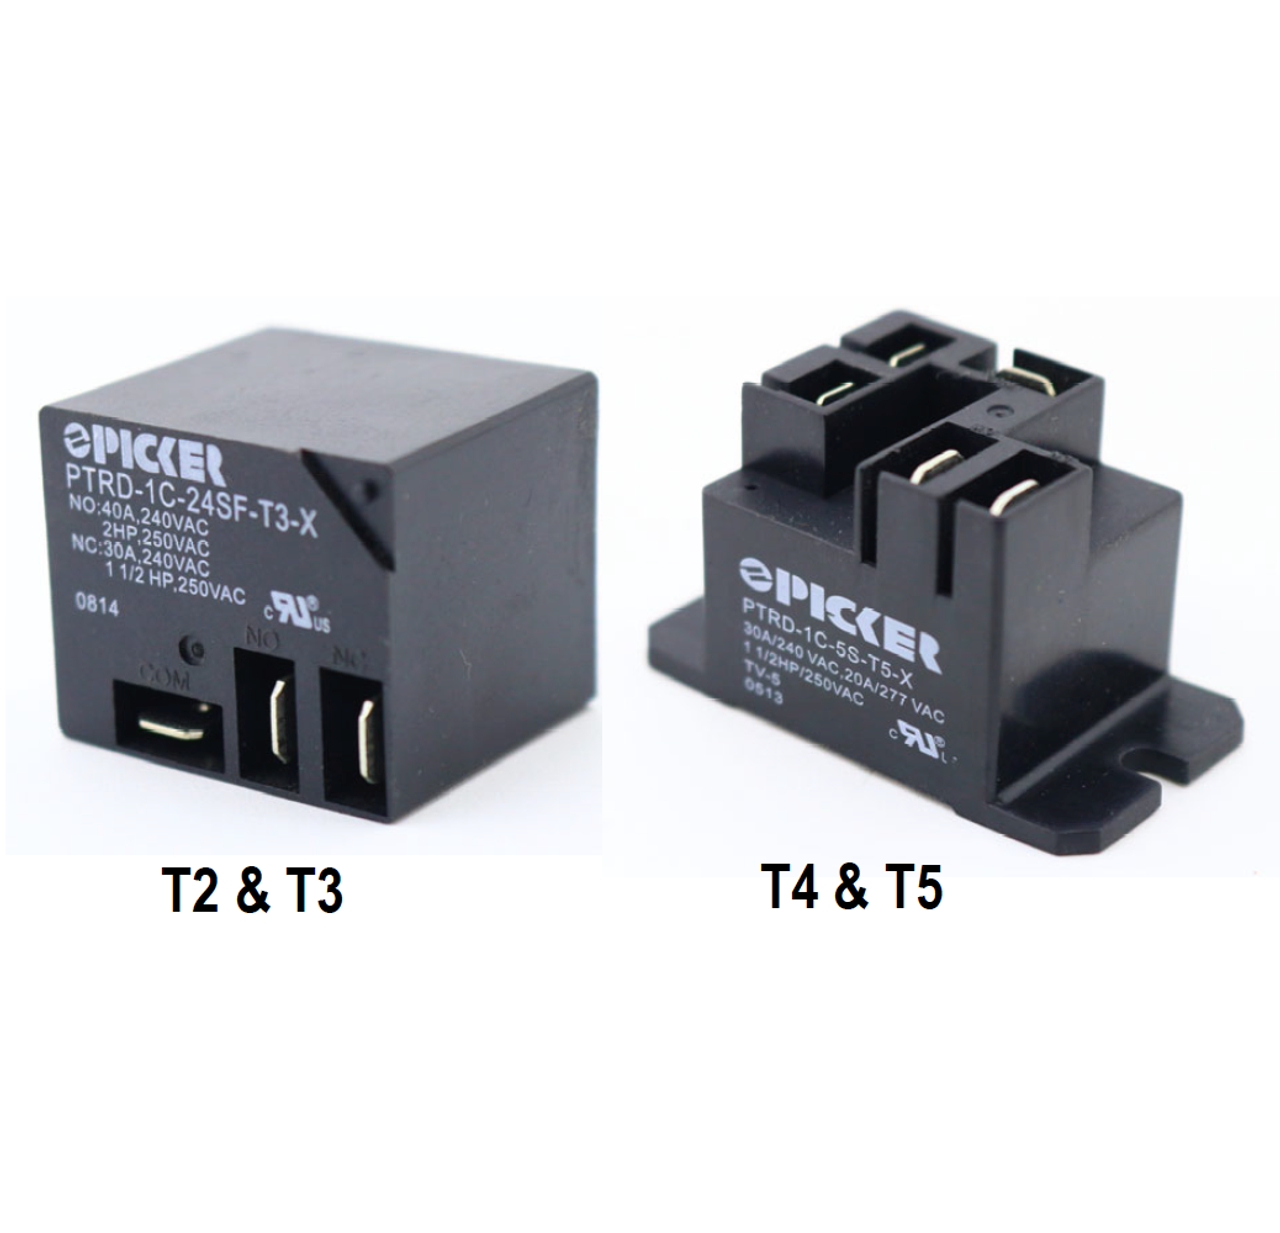 Picker PTRD-1A-48S-T4-X-A0.6G Power Relays